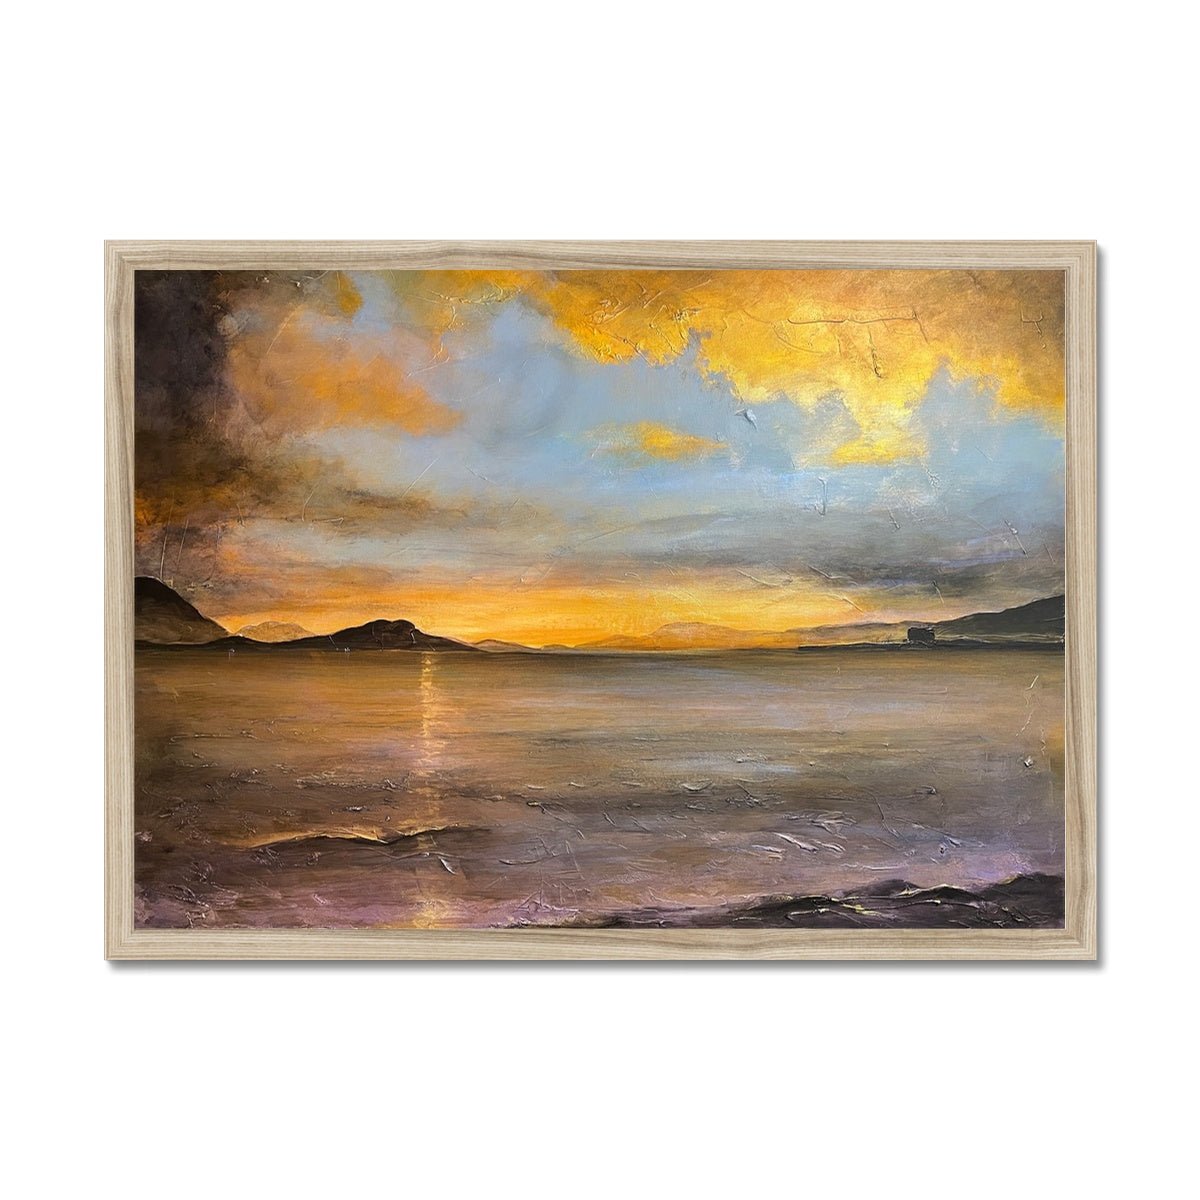 Loch Linnhe Sunset Painting | Framed Prints From Scotland-Framed Prints-Scottish Lochs & Mountains Art Gallery-A2 Landscape-Natural Frame-Paintings, Prints, Homeware, Art Gifts From Scotland By Scottish Artist Kevin Hunter